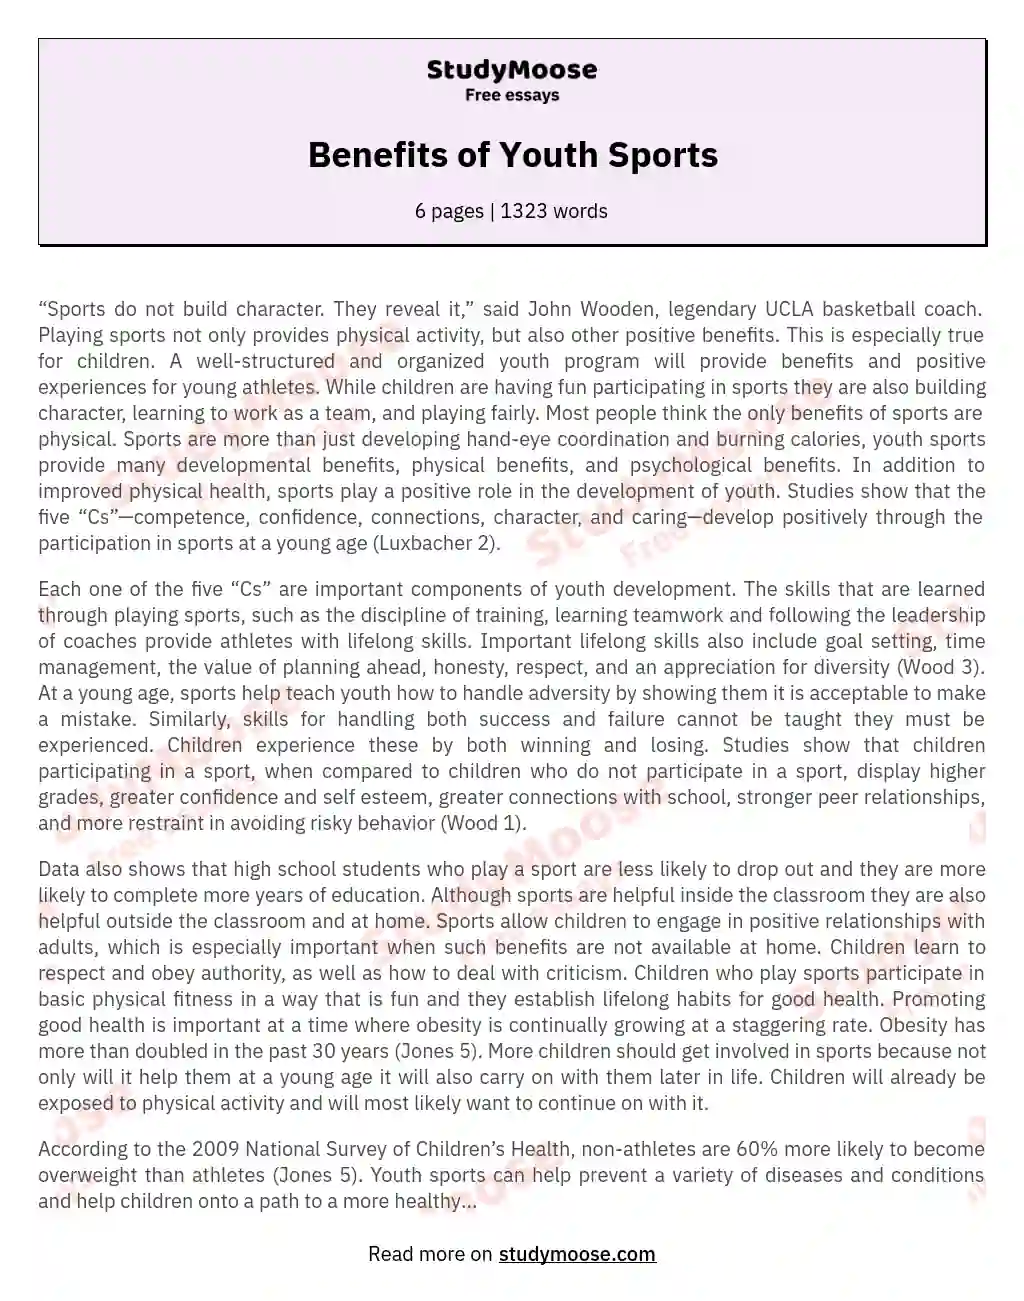 Benefits of Youth Sports essay